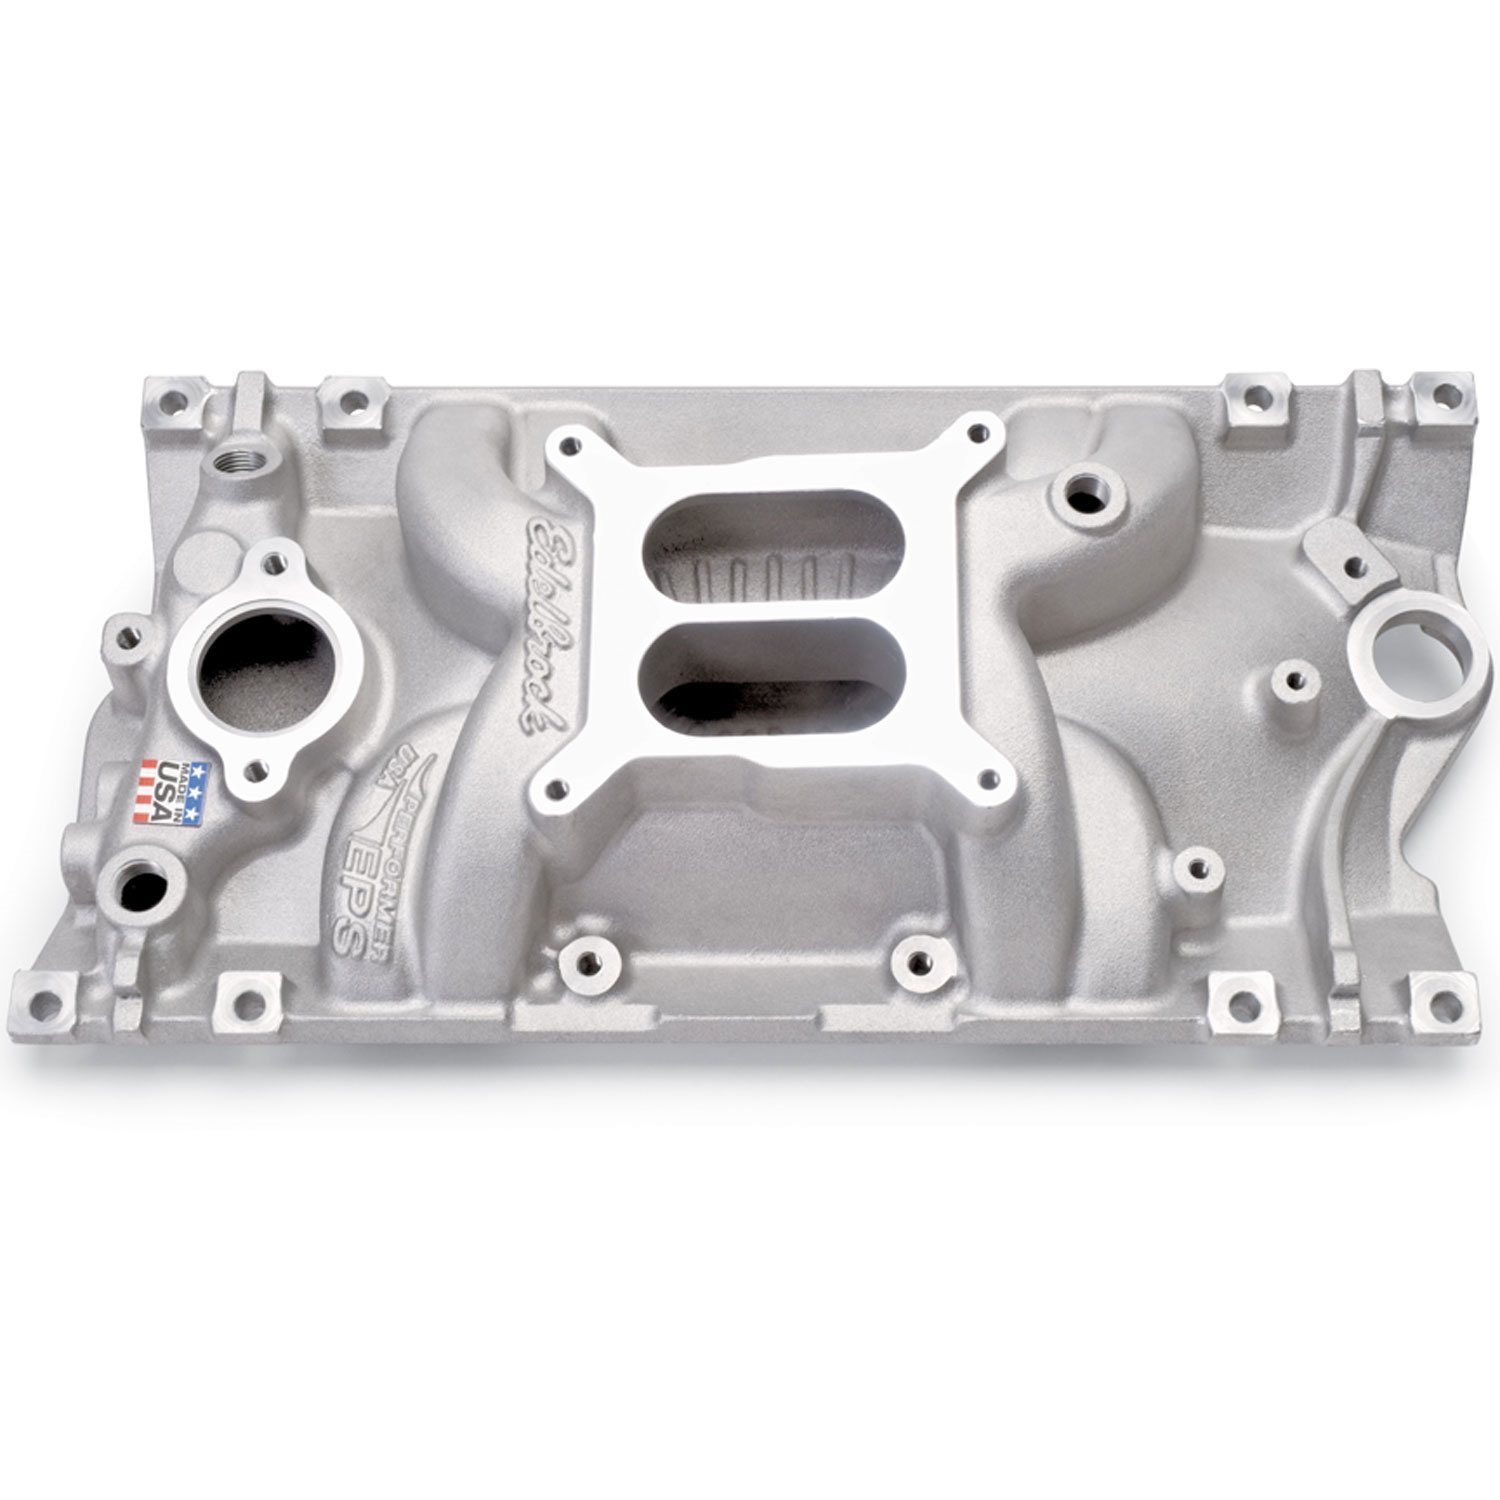 Performer EPS Vortec Intake Manifold for Small Block Chevy